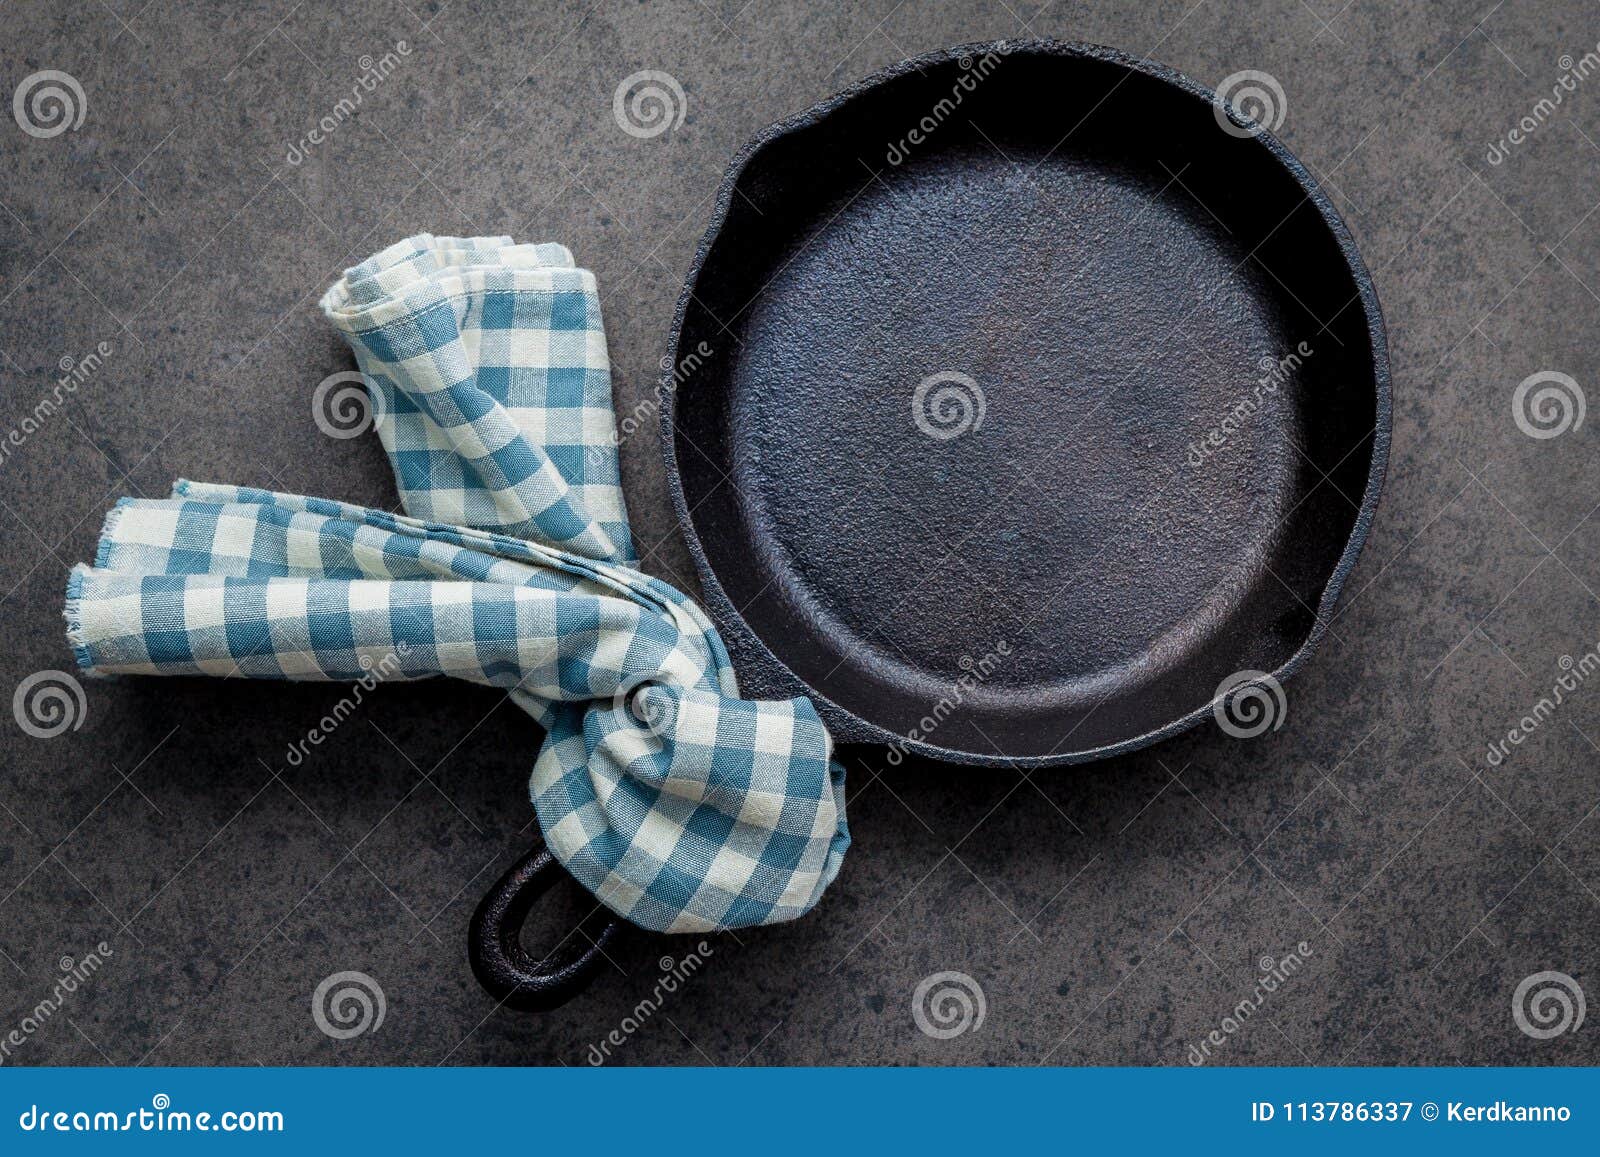 empty cast iron skillet frying pan flat lay on dark stone background with copy space .